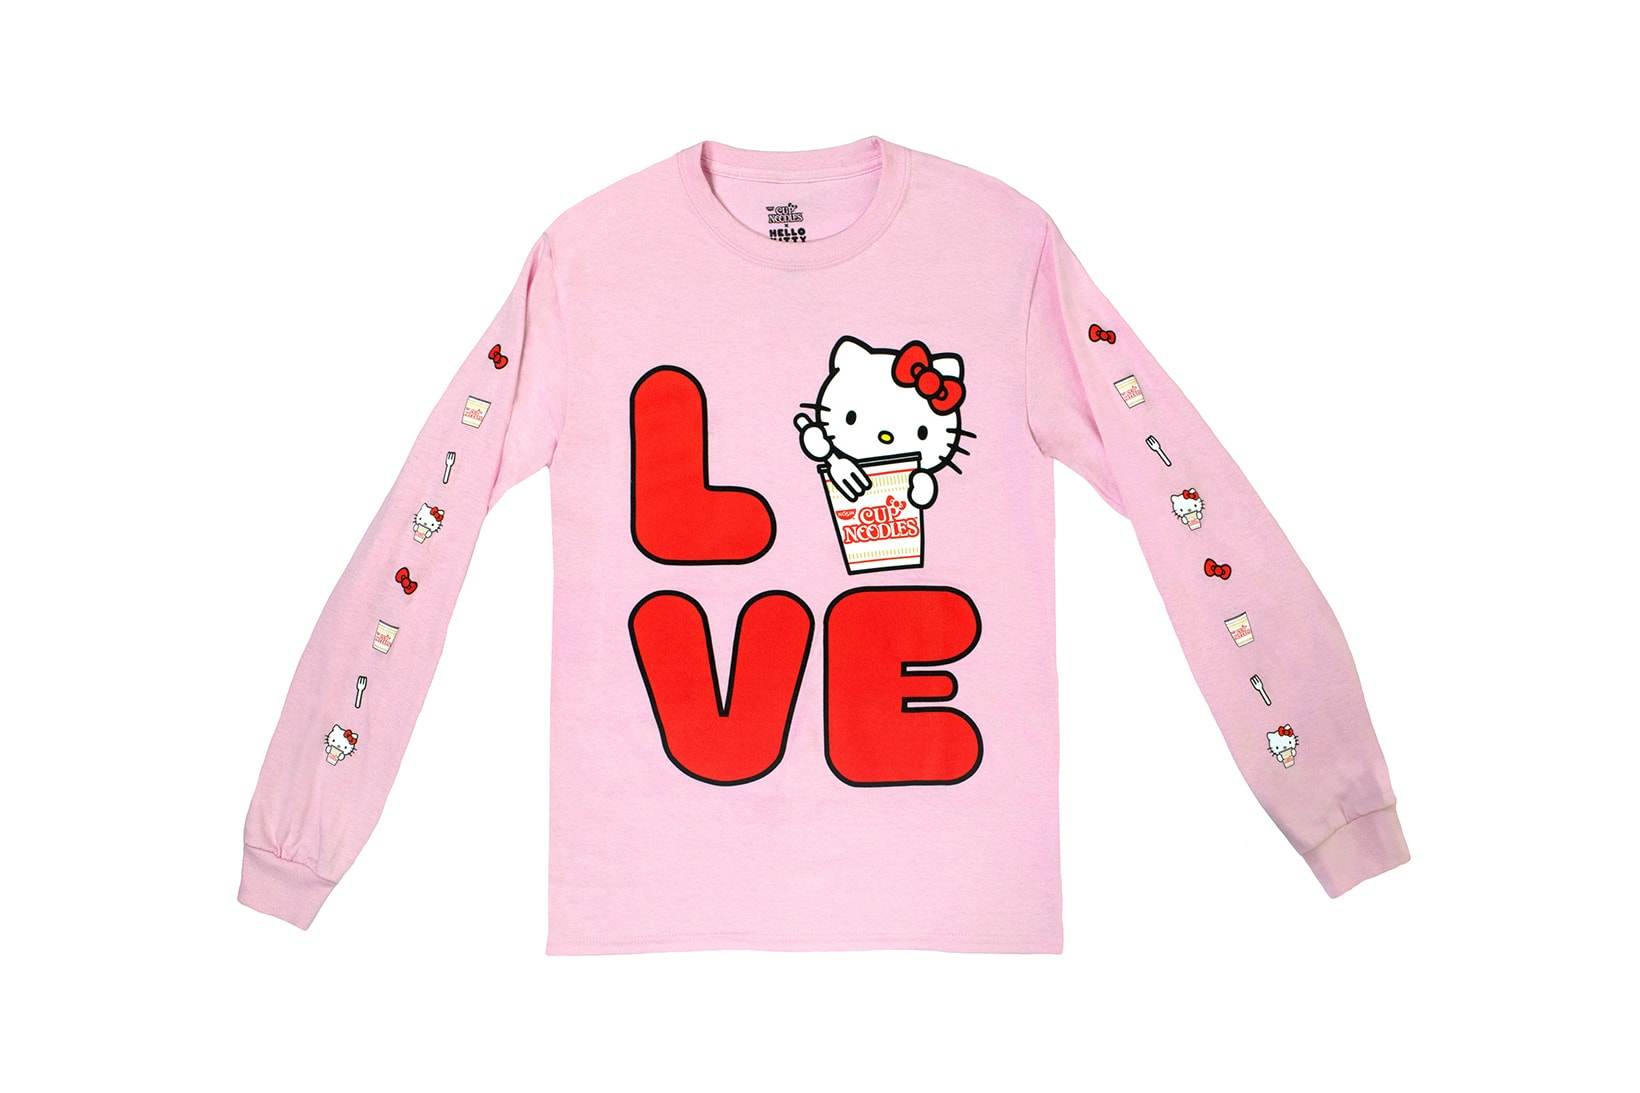 Hello Kitty Sanrio x Cup Noodles Collaboration Sweater Pink